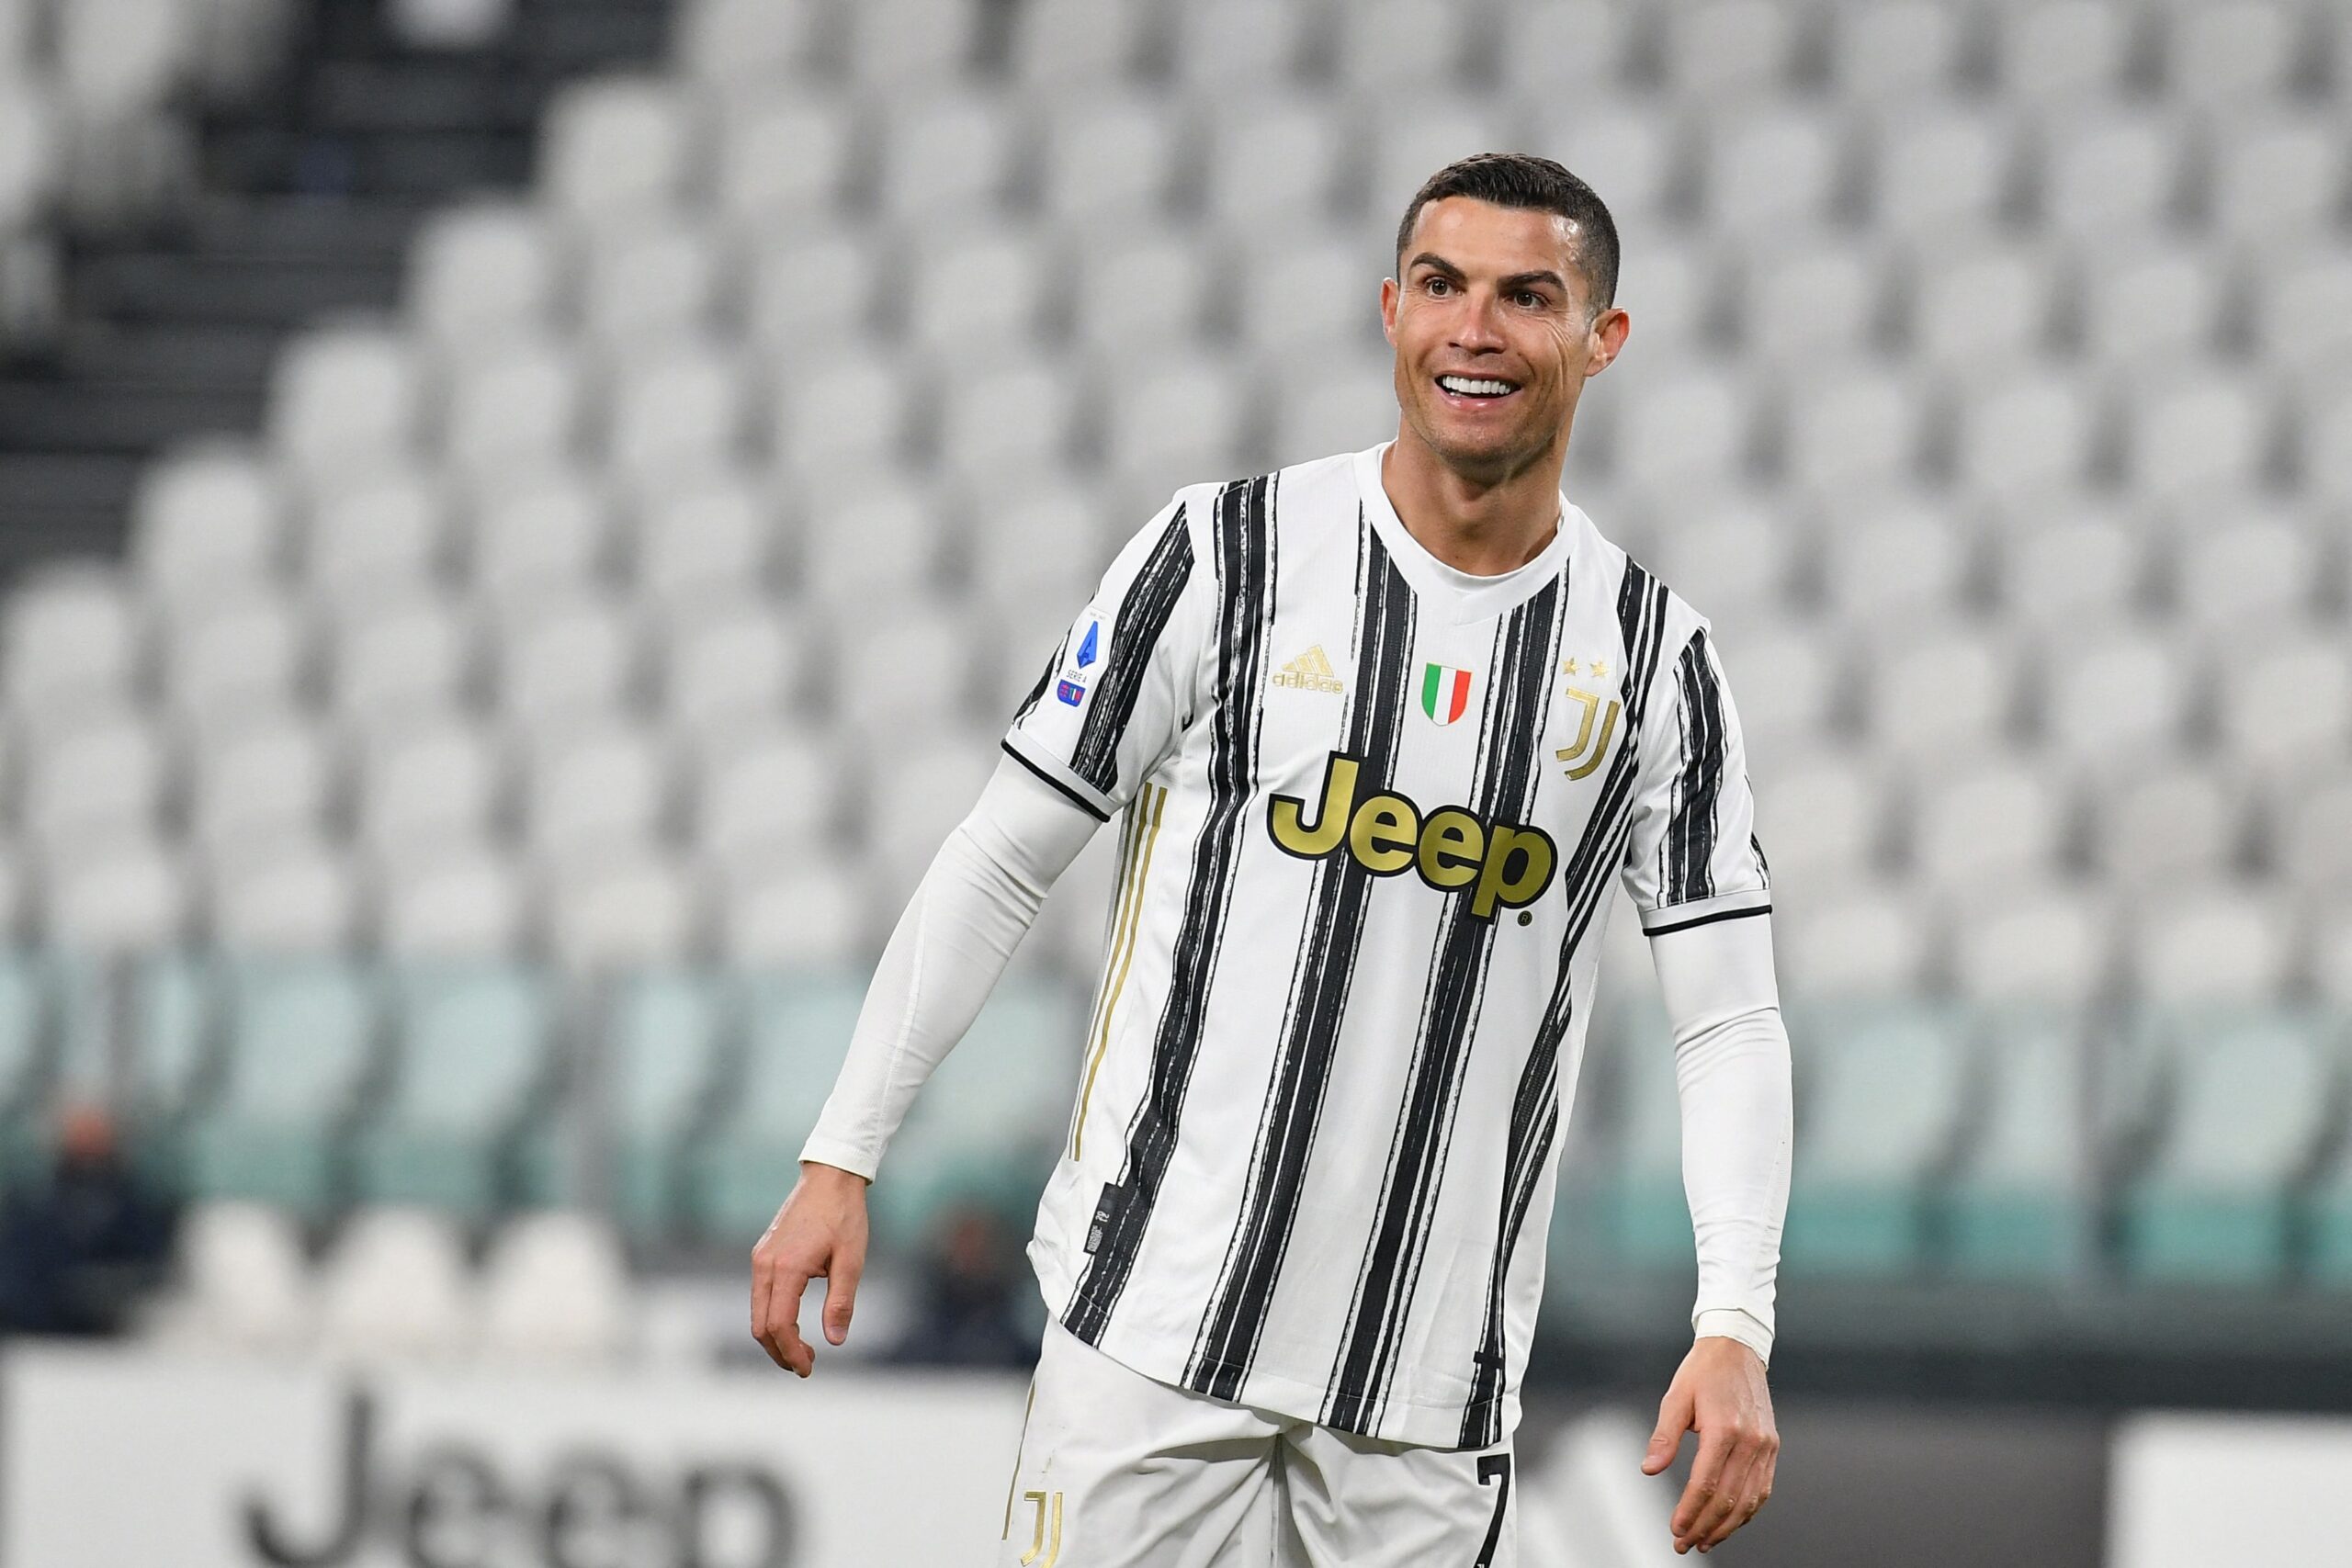 Juventus' Portuguese forward Cristiano Ronaldo reacts during the Italian Serie A football match Juventus vs Spezia on March 02, 2021 at the Juventus stadium in Turin. (Photo by Isabella BONOTTO / AFP)